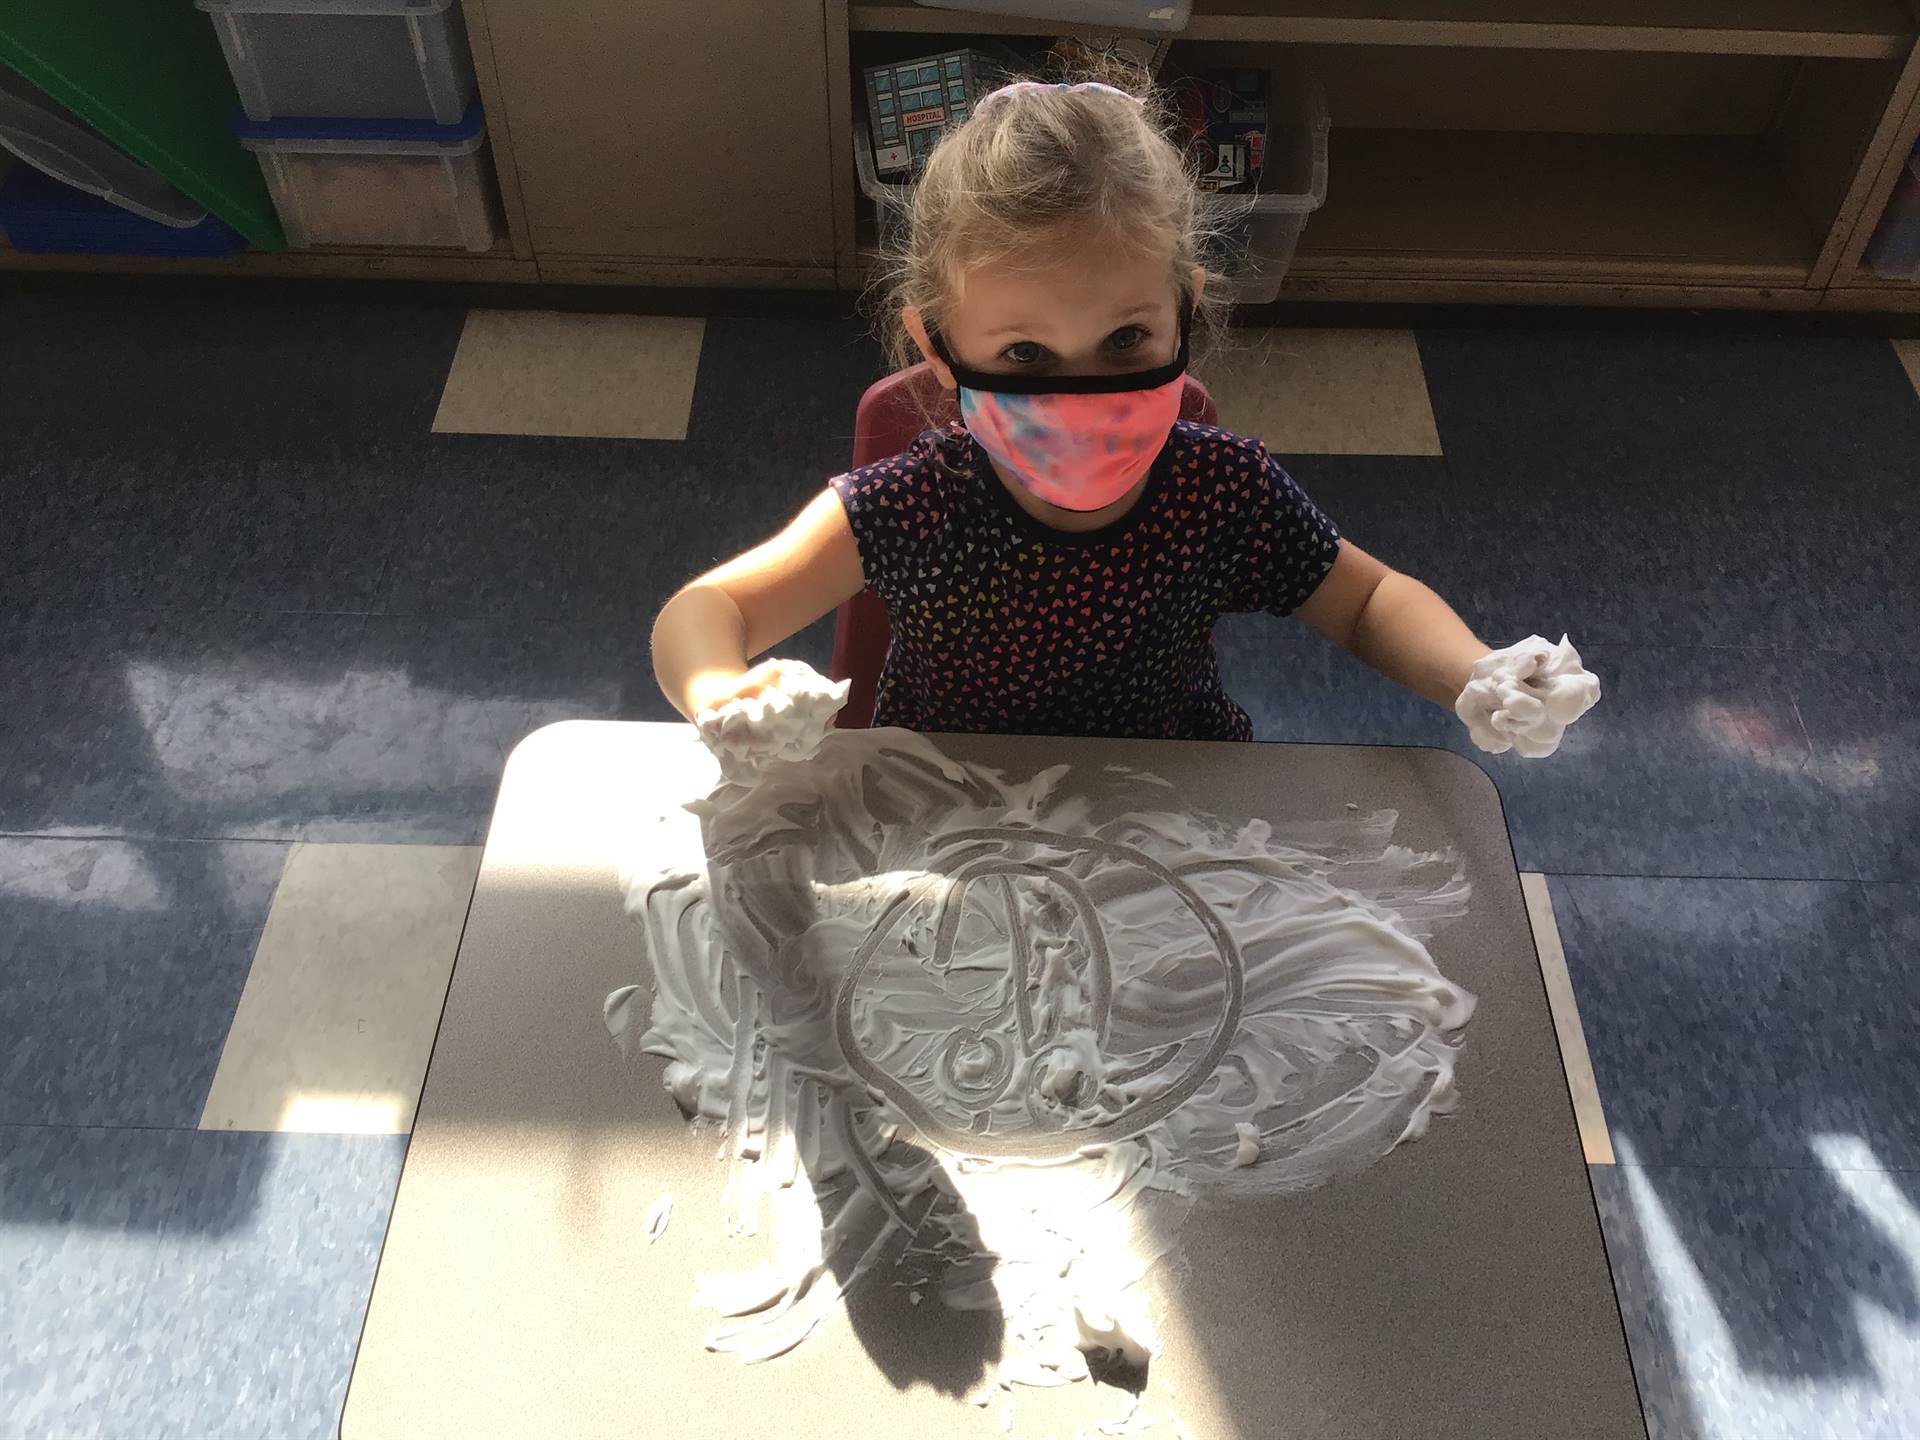 A student draws a happy face in shaving cream.